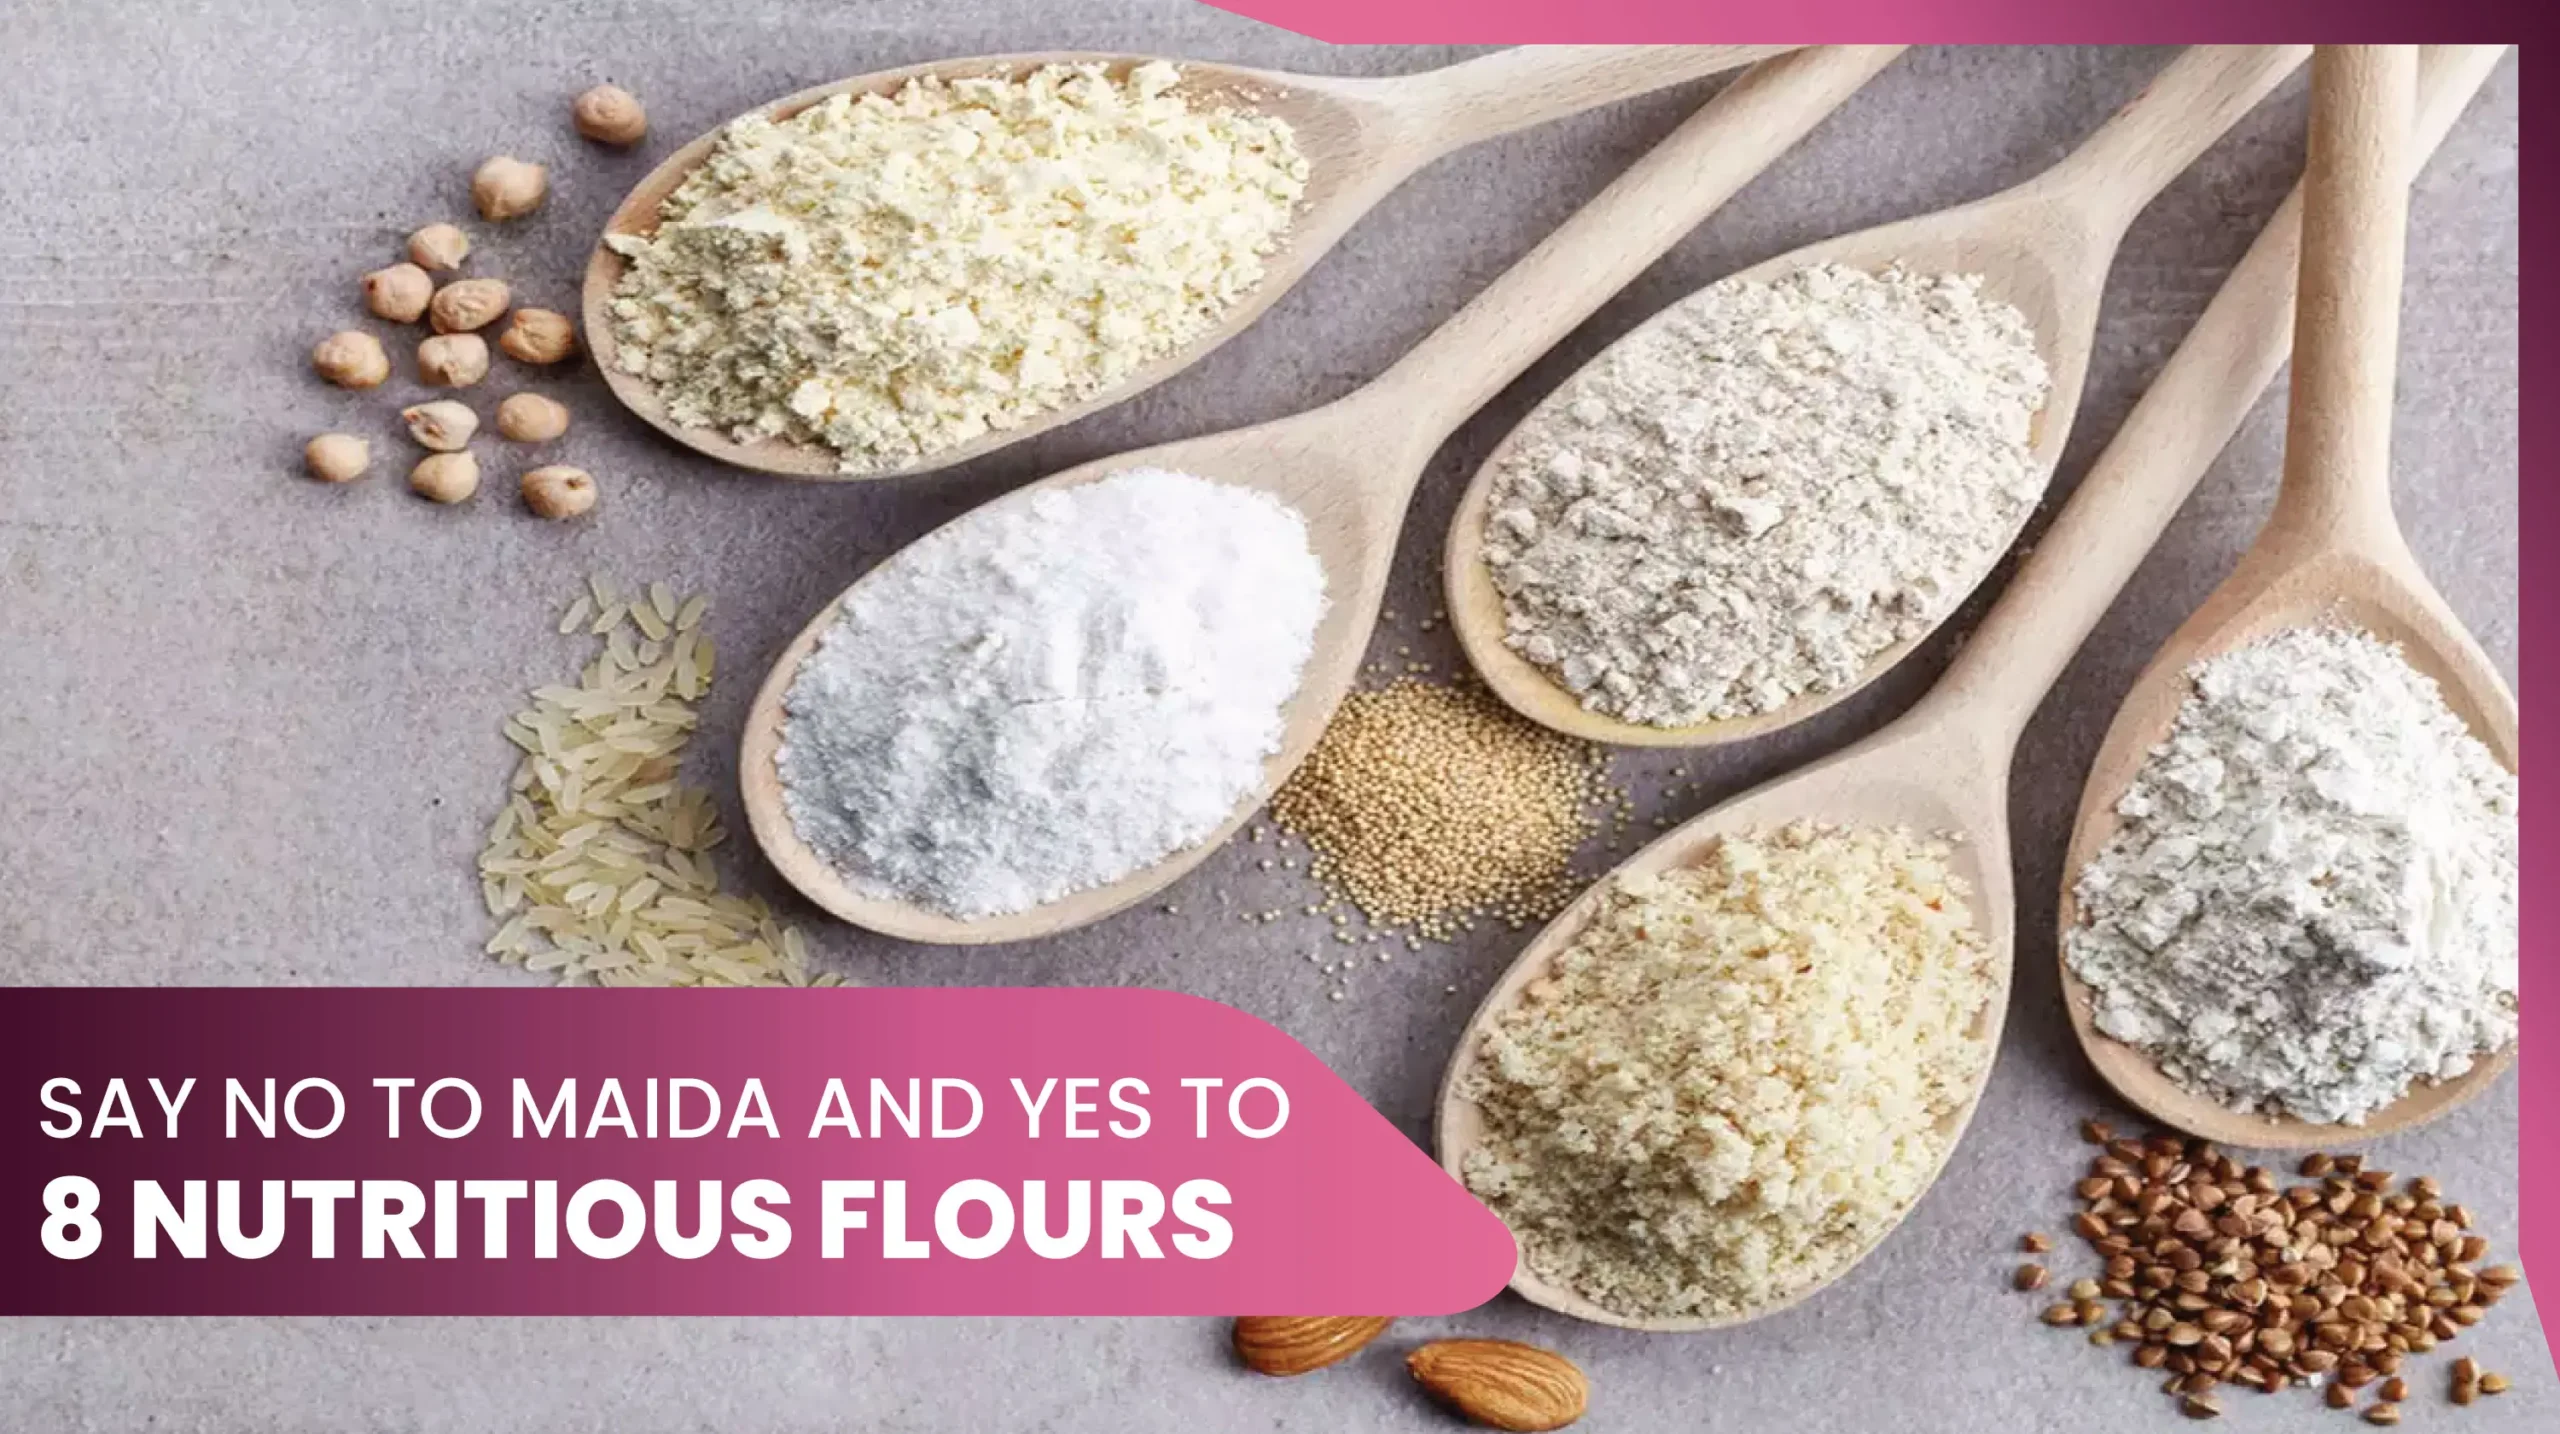 11say no to Maida refined flour and yes to 8 healthier flours